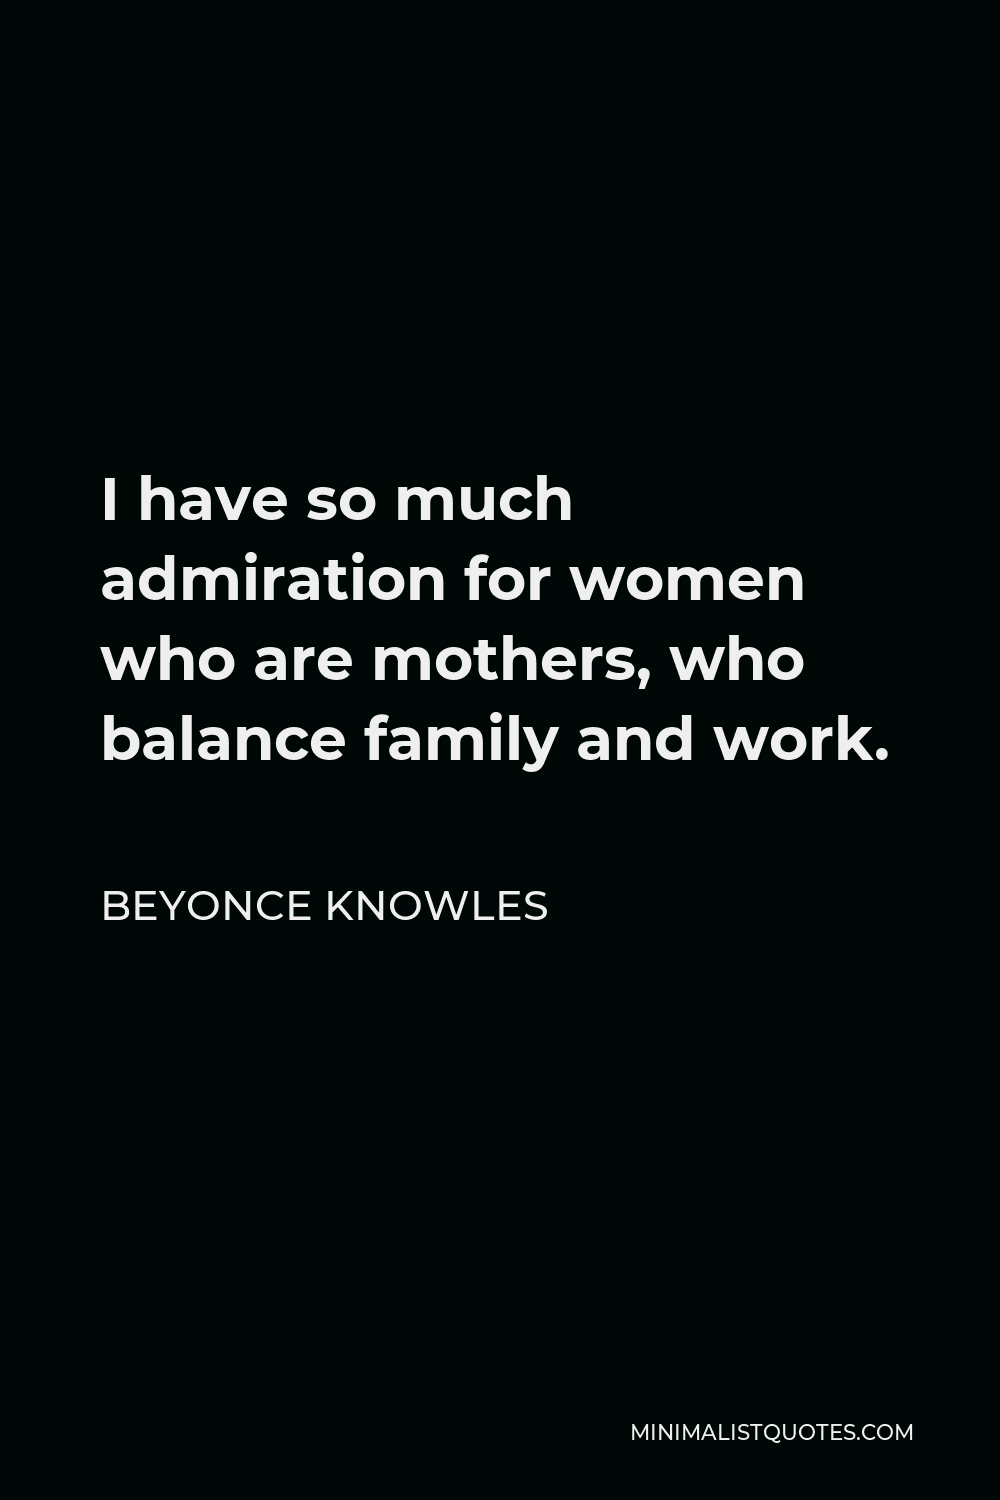 Beyonce Knowles Quote - I have so much admiration for women who are mothers, who balance family and work.